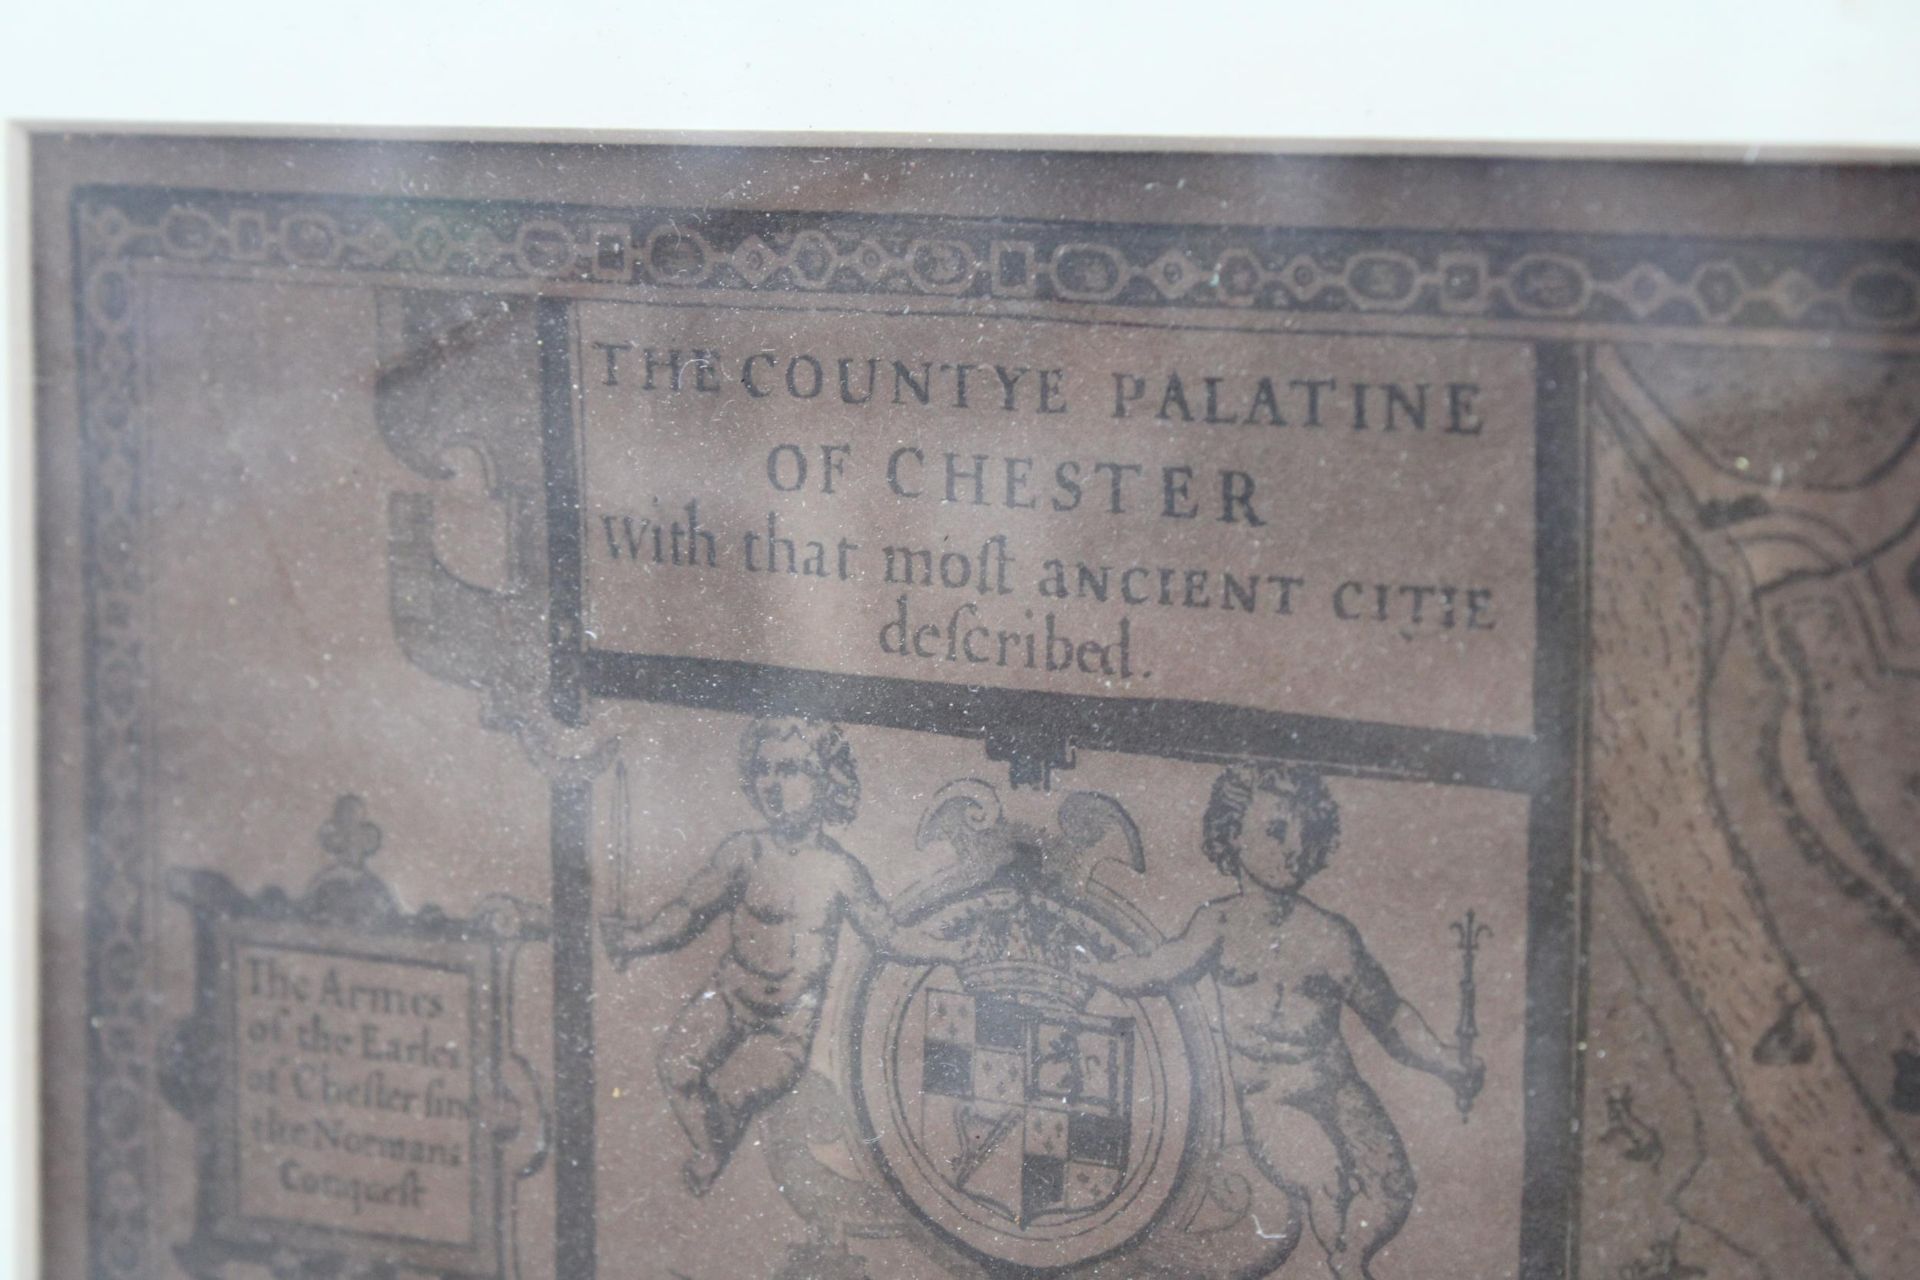 A FRAMED VINTAGE MAP OF 'THE COUNTYE PALATINE OF CHESTER' - Image 4 of 4